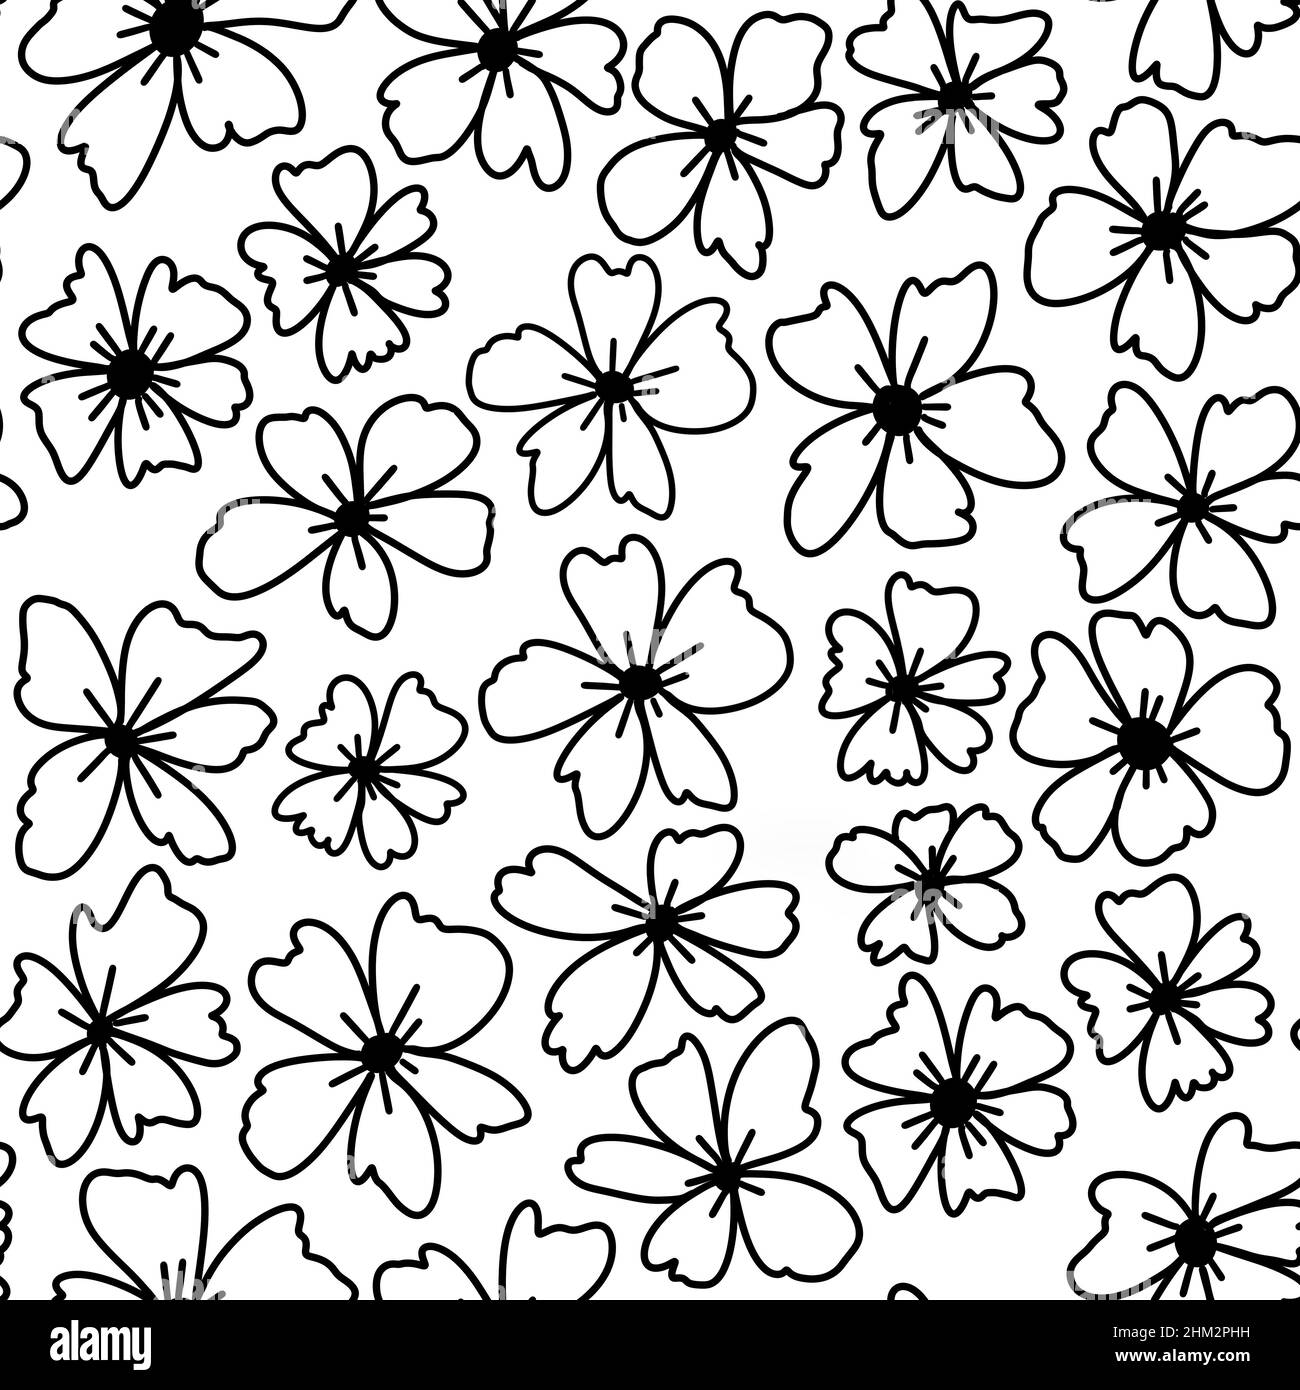 Seamless hand drawn pattern with black and white flowers floral botanical elements, leaves leaf branch blossom. Minimalist monochrome daisy rose peony plants on white background, for textile wallpaper wrapping paper decor Stock Photo